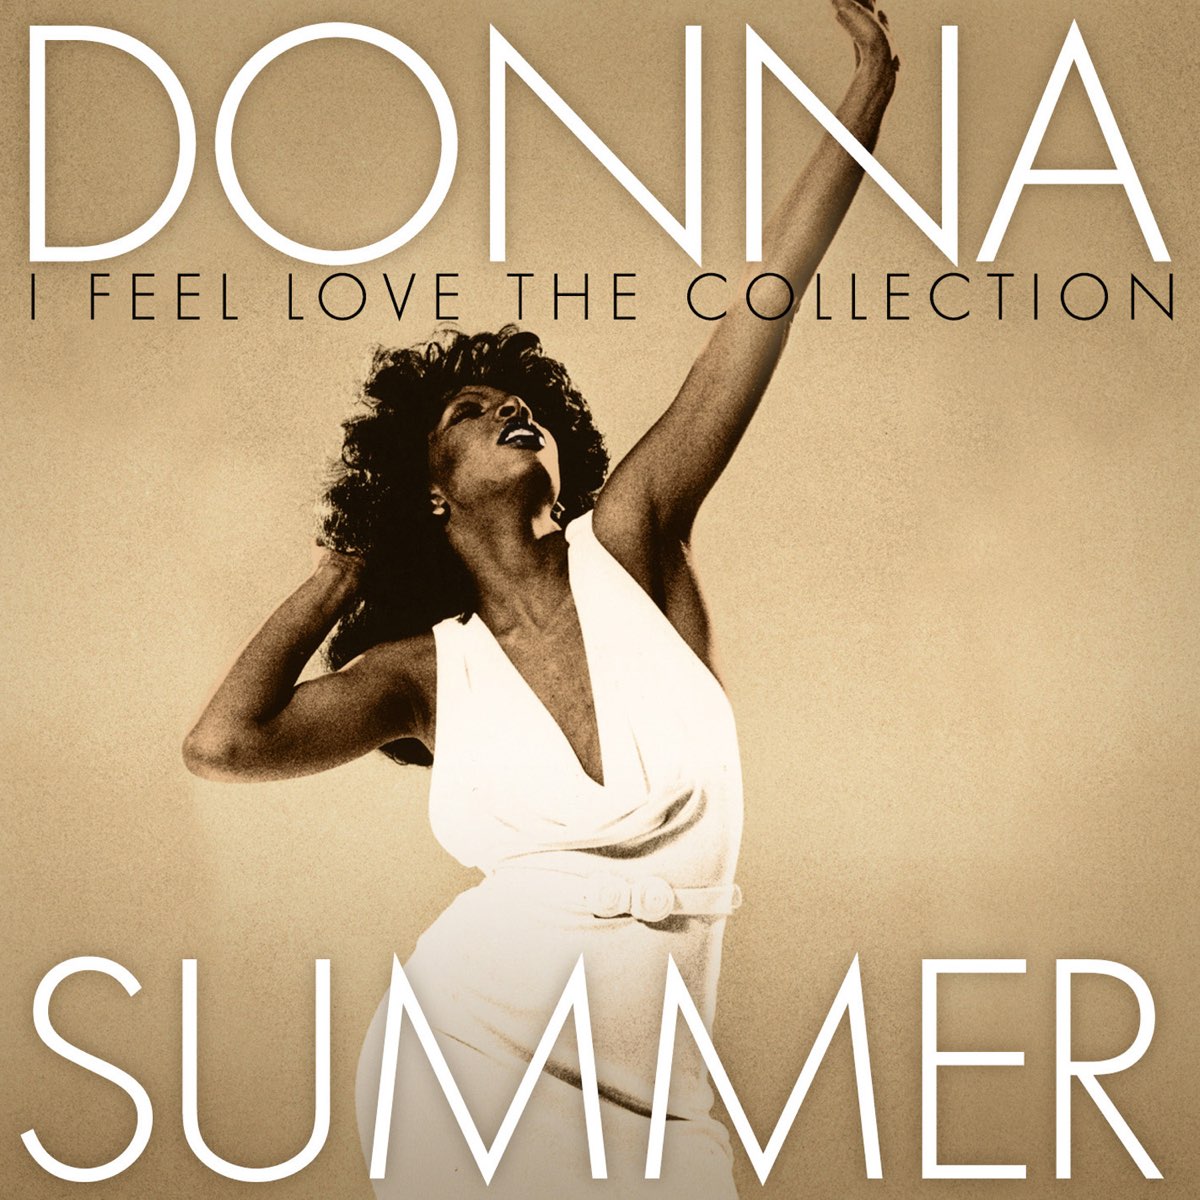 ‎I Feel Love: The Collection by Donna Summer on Apple Music